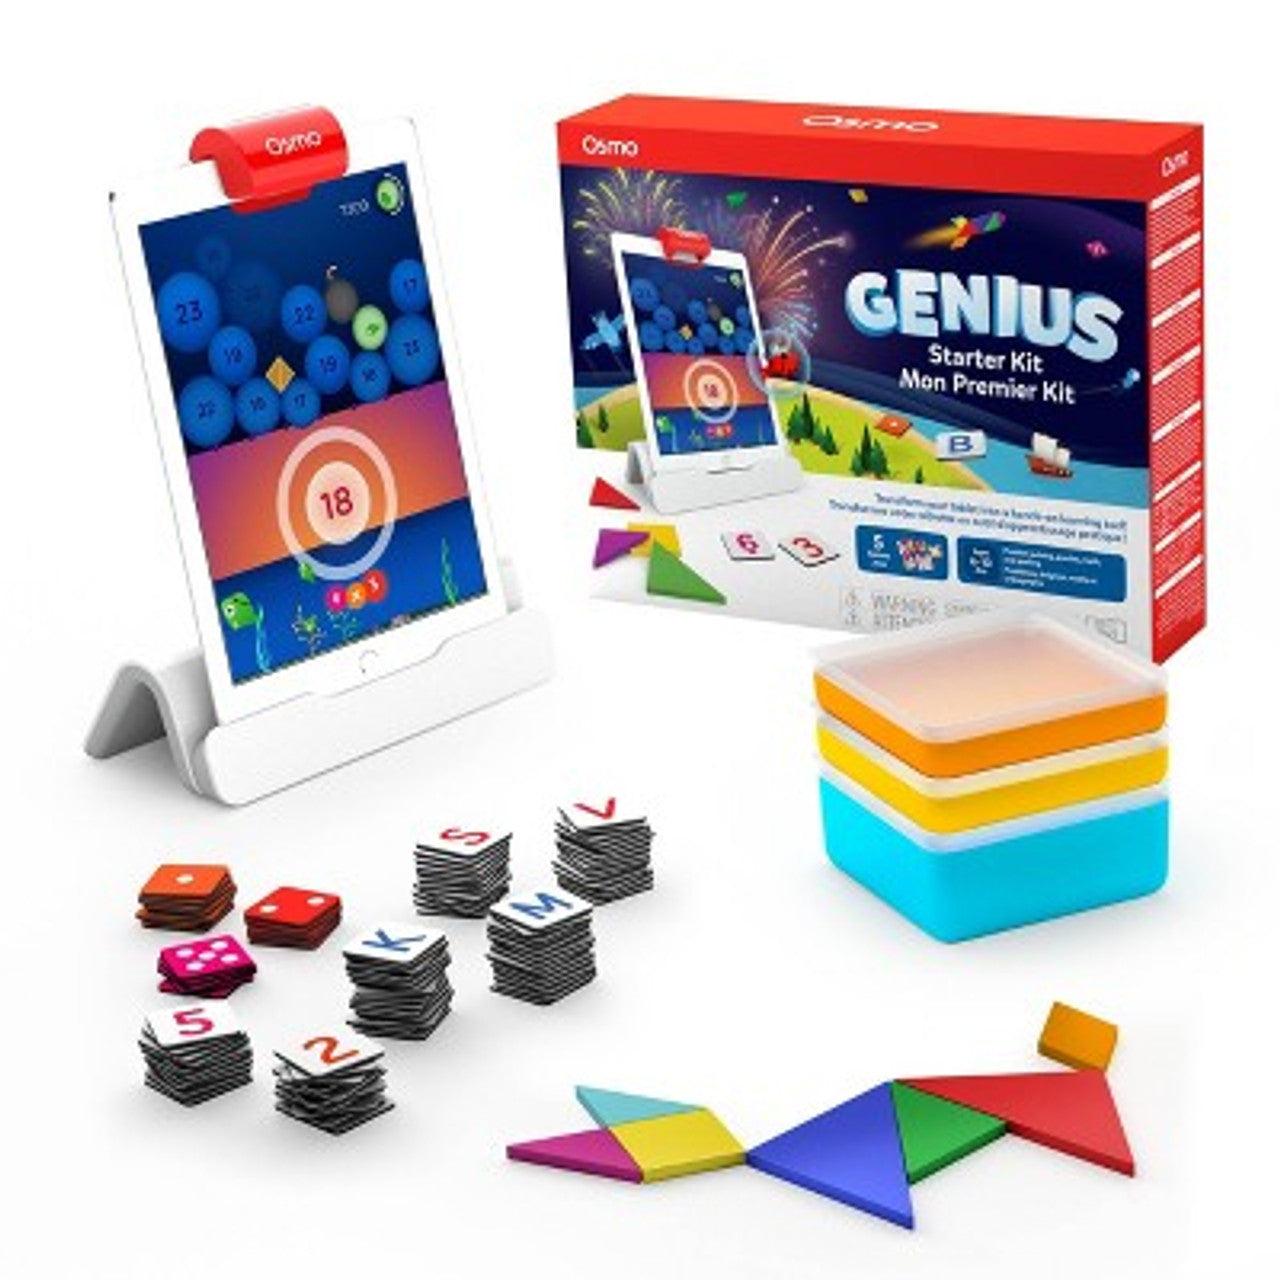 New Osmo Genius Starter Kit for iPad (New Version) Ages 6-10